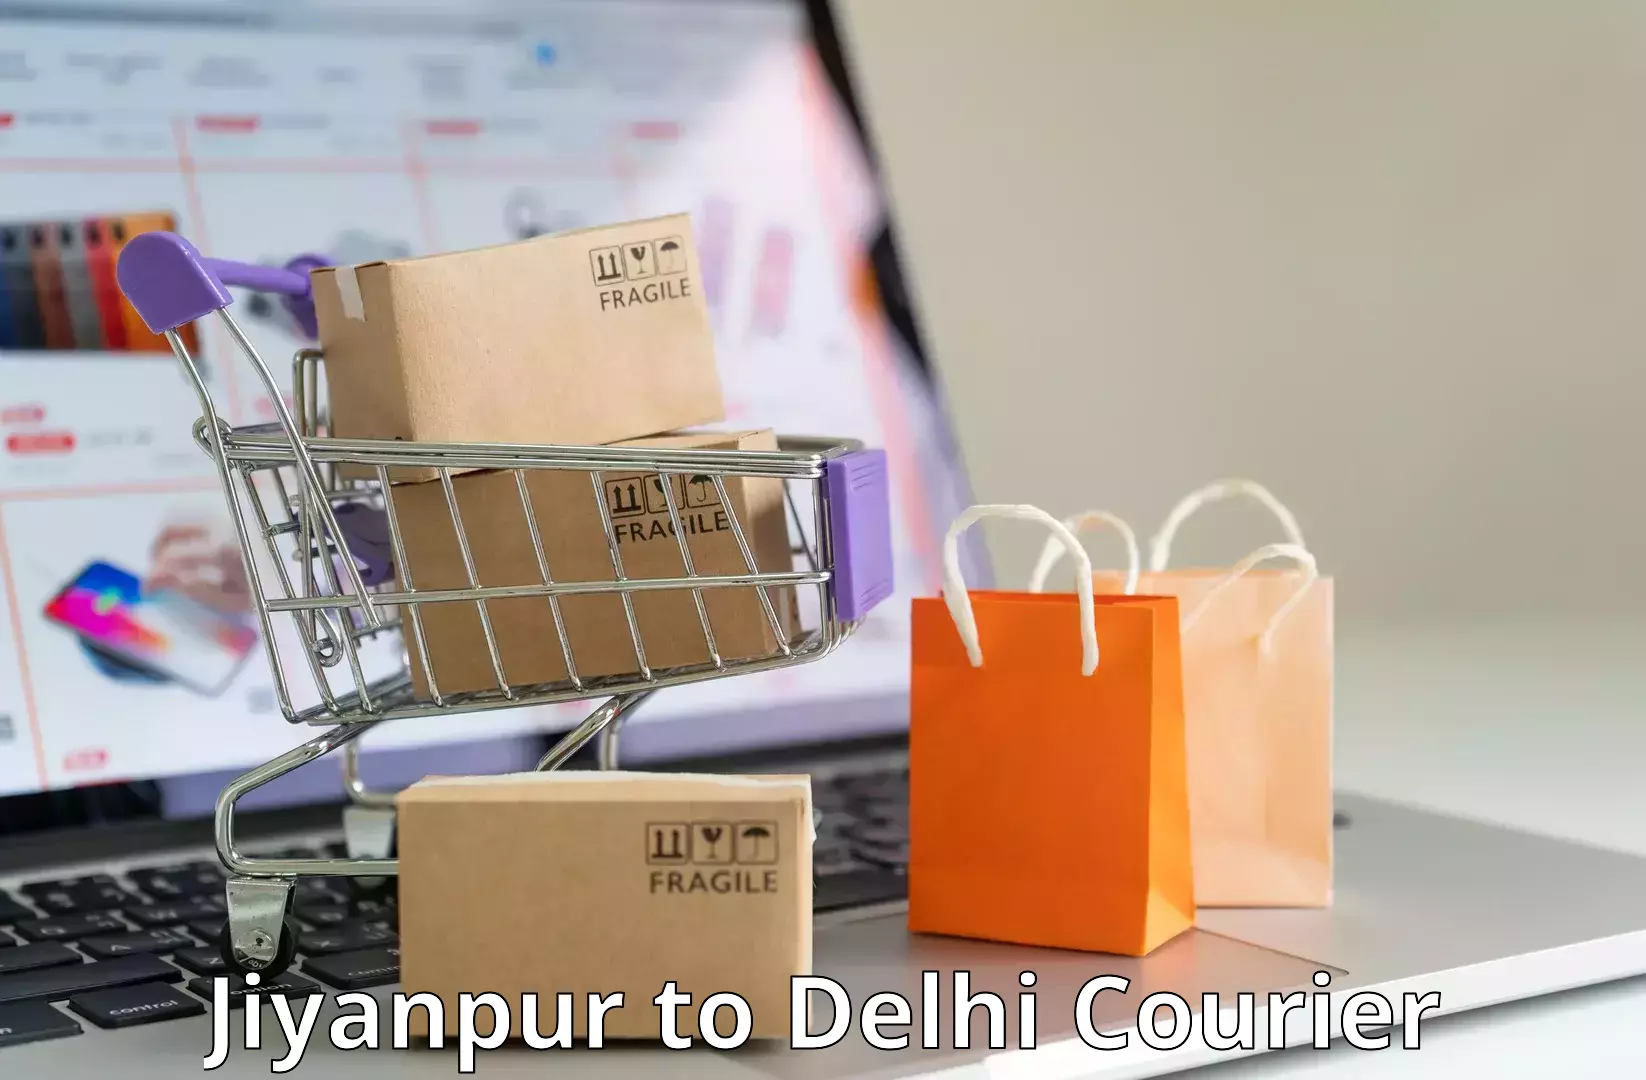 Parcel service for businesses Jiyanpur to Kalkaji